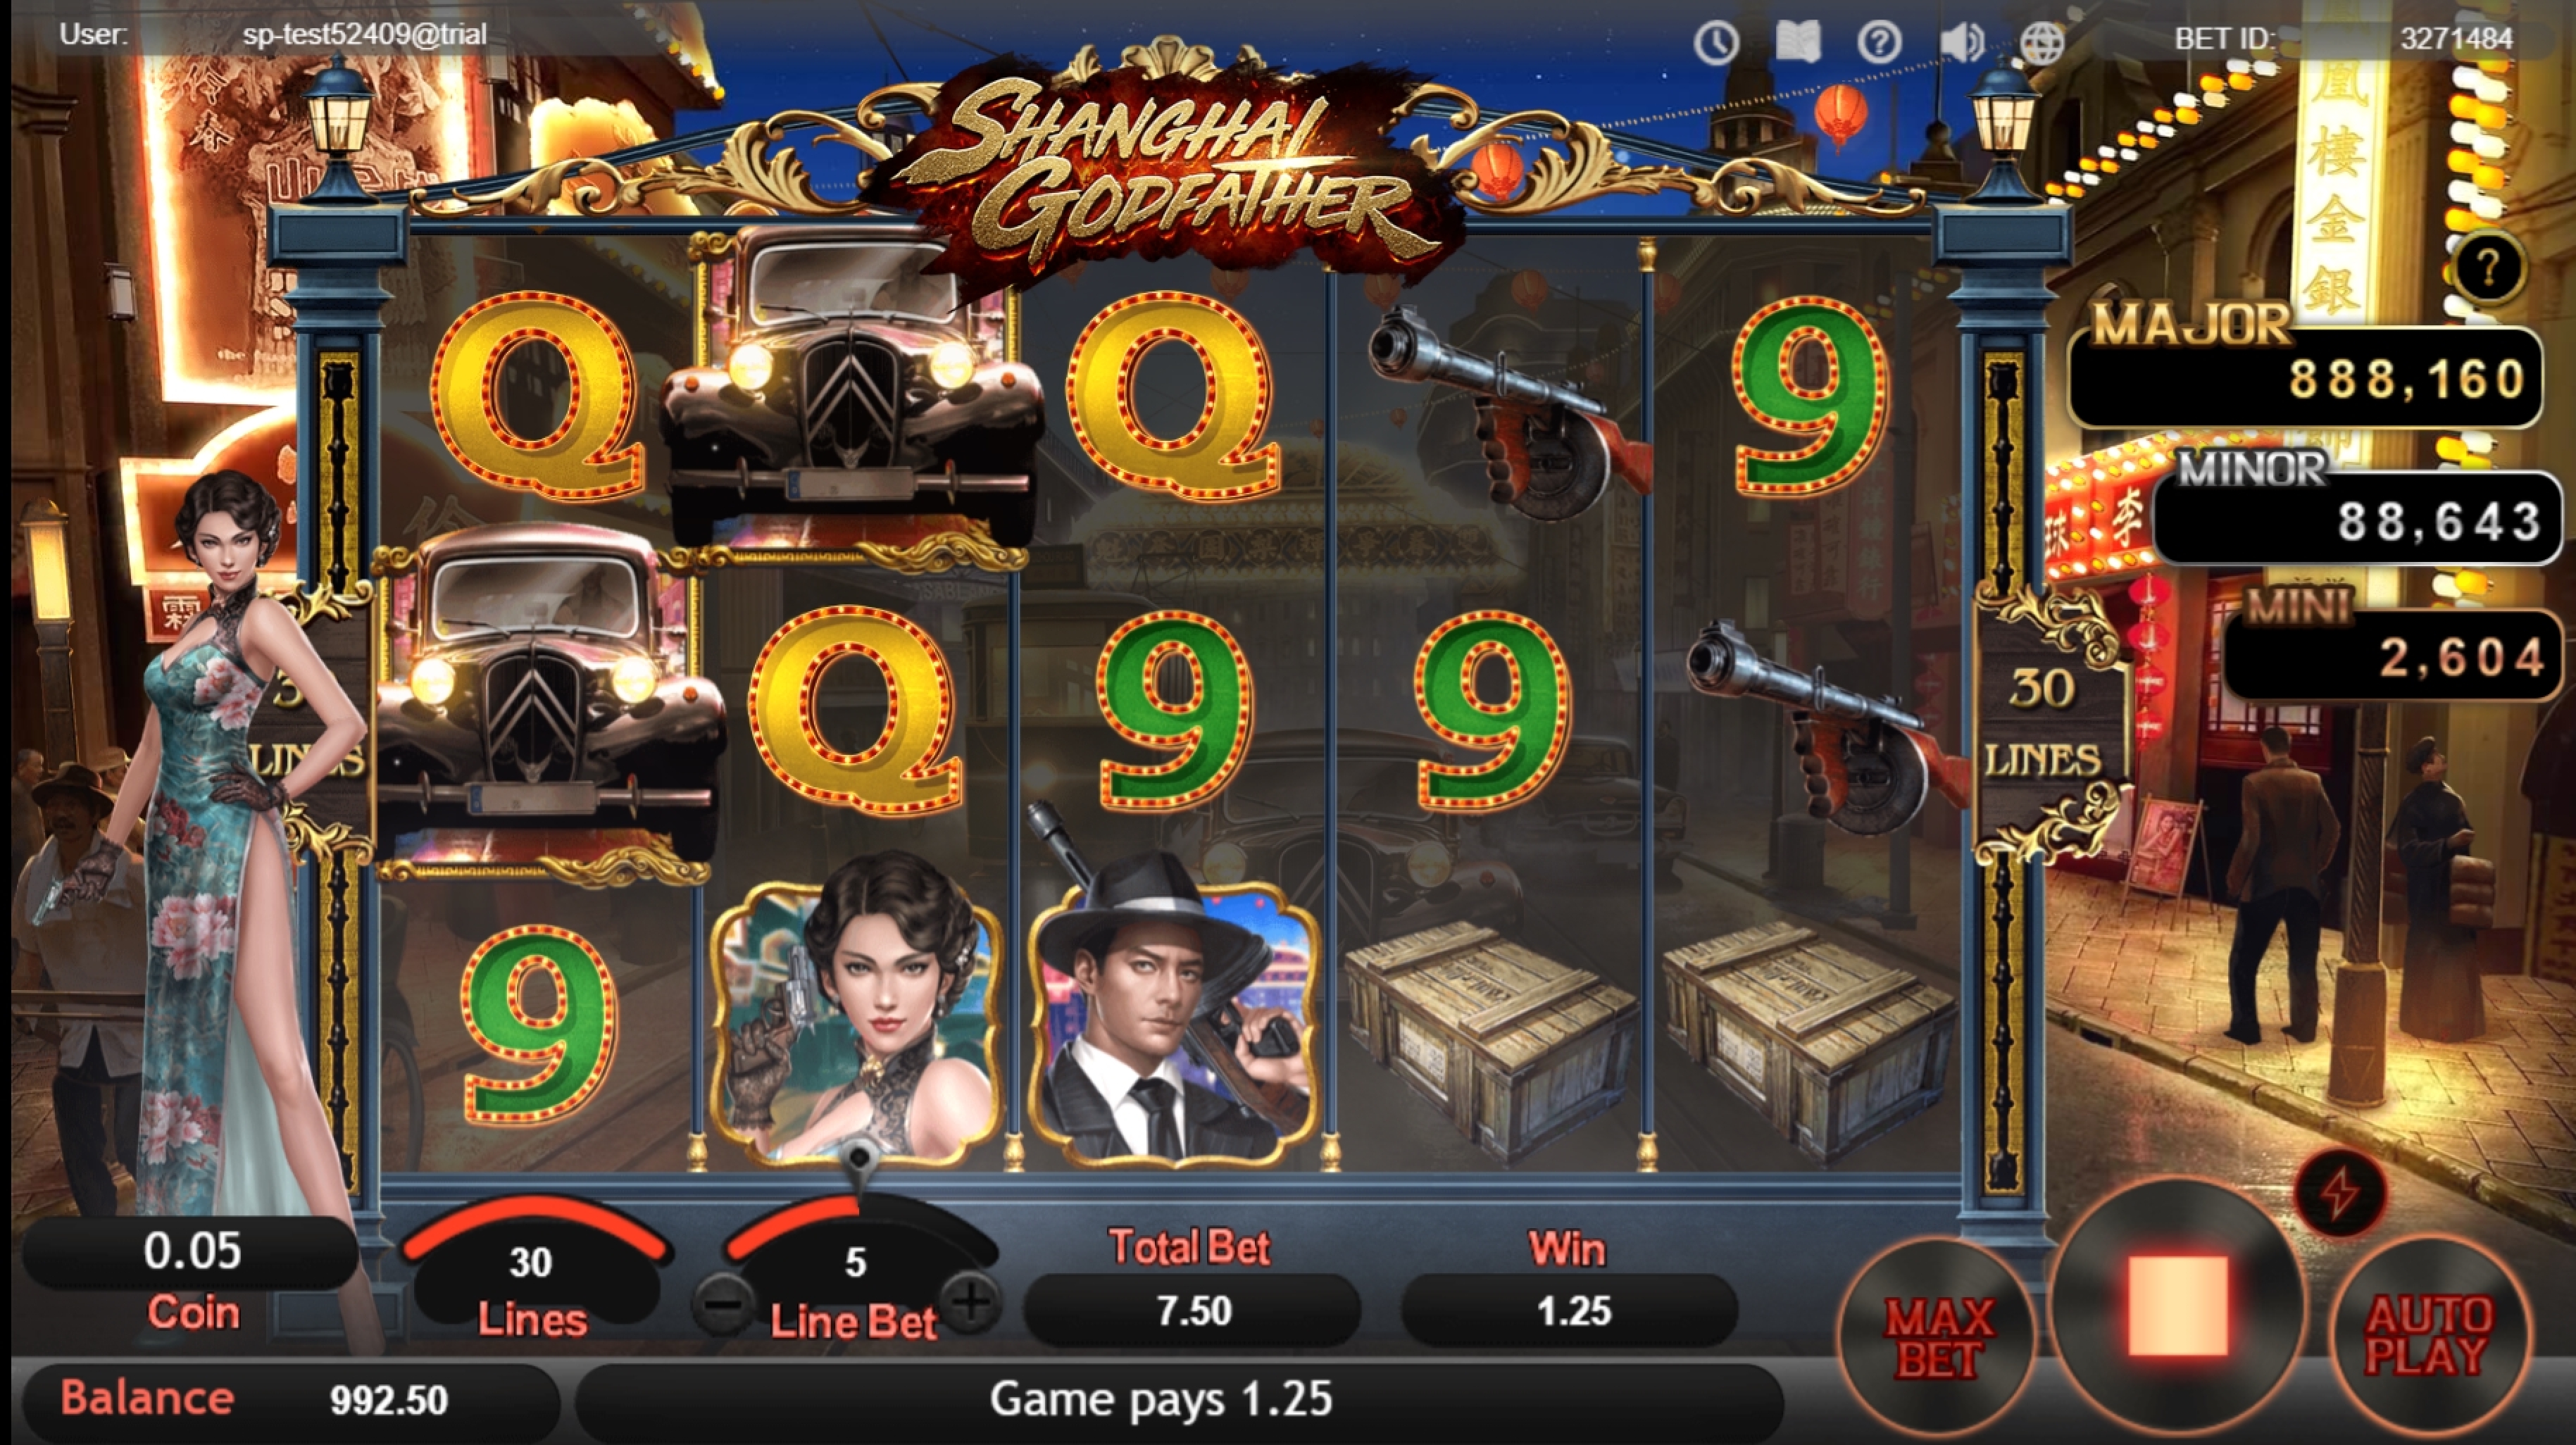 Win Money in Shanghai Godfather Free Slot Game by SimplePlay